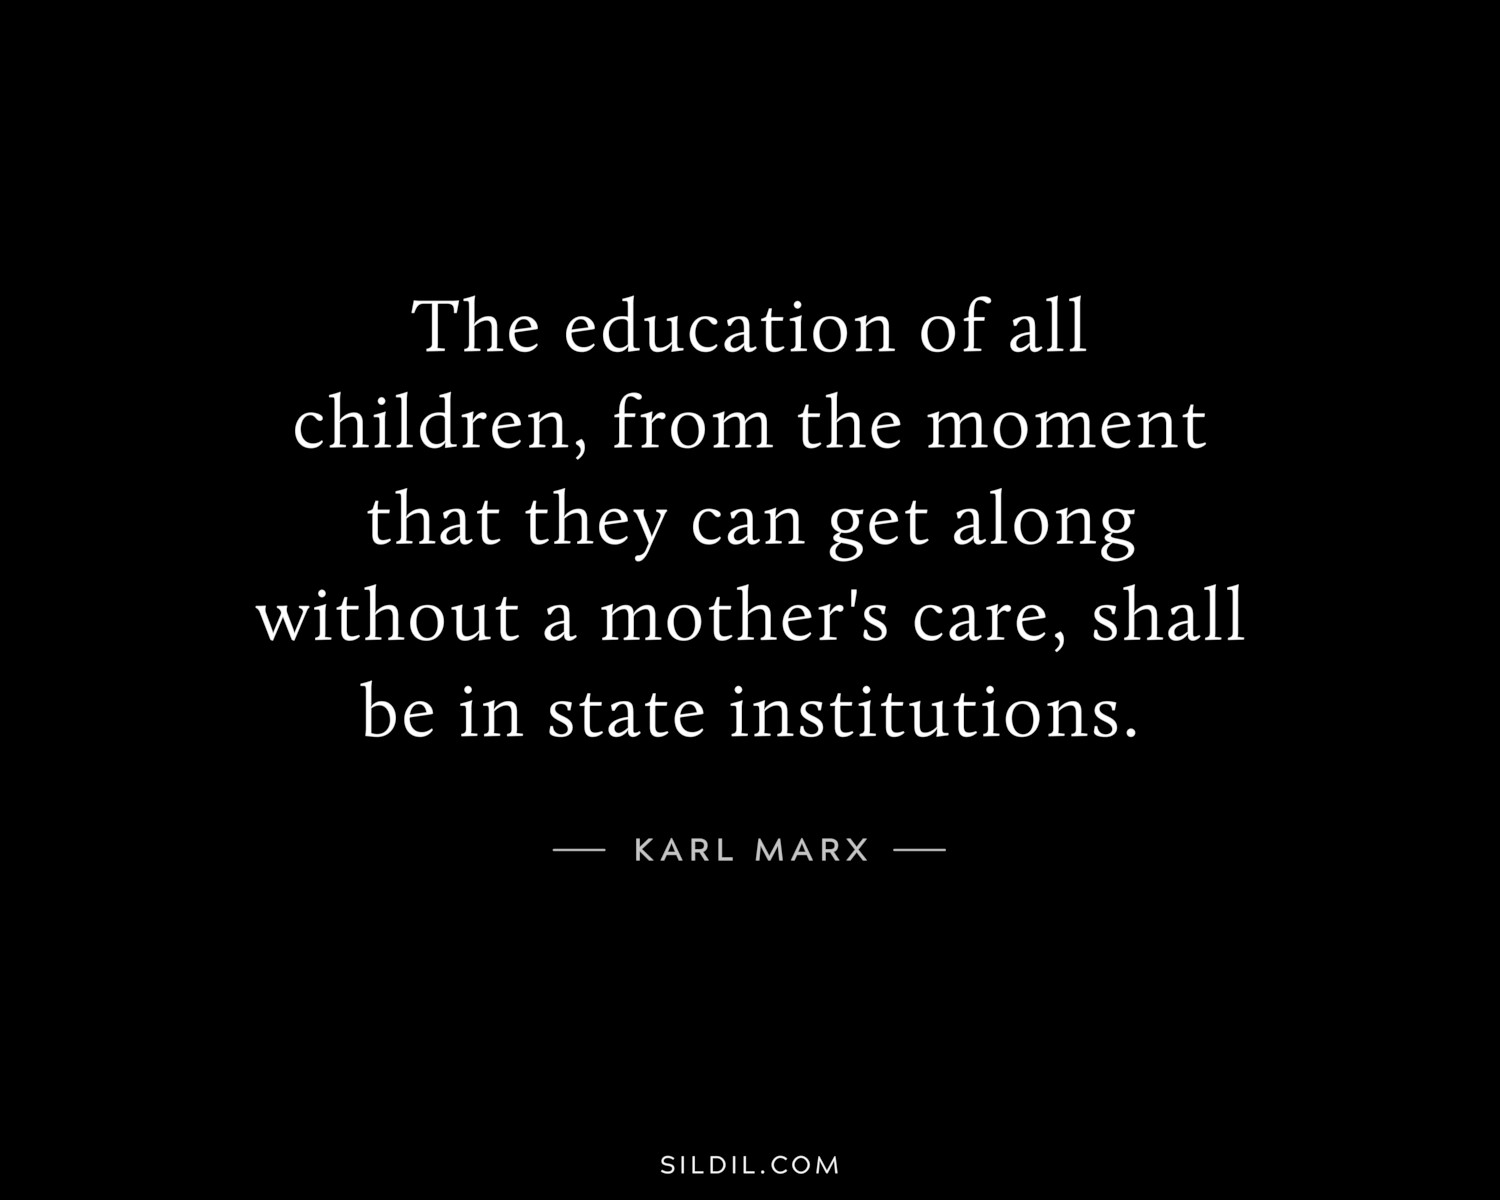 The education of all children, from the moment that they can get along without a mother's care, shall be in state institutions.